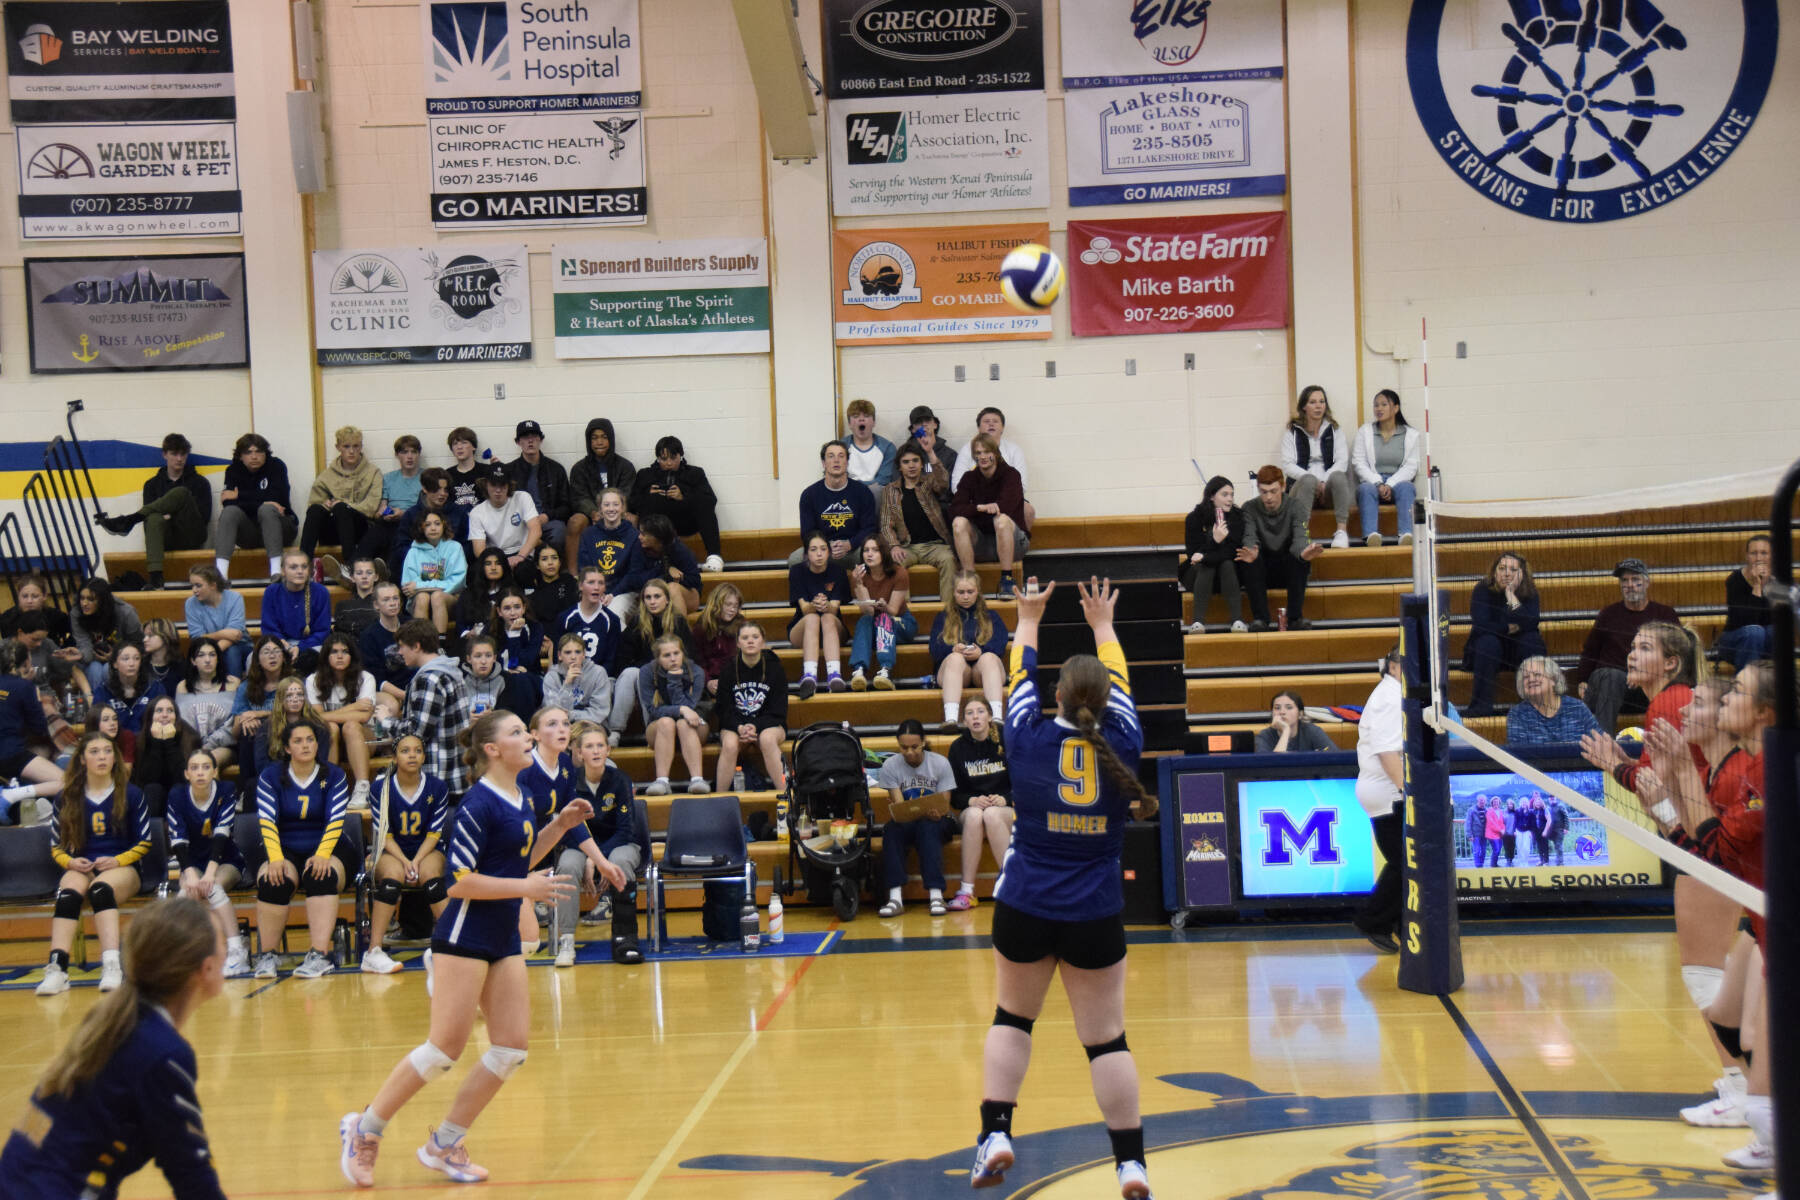 Rebecca Trowbridge sets the ball at the varsity game against the Kenai Kardinals on Saturday, Sept. 9, 2023 in the Alice Witte Gymnasium at Homer High School in Homer, Alaska. (Delcenia Cosman/Homer News)